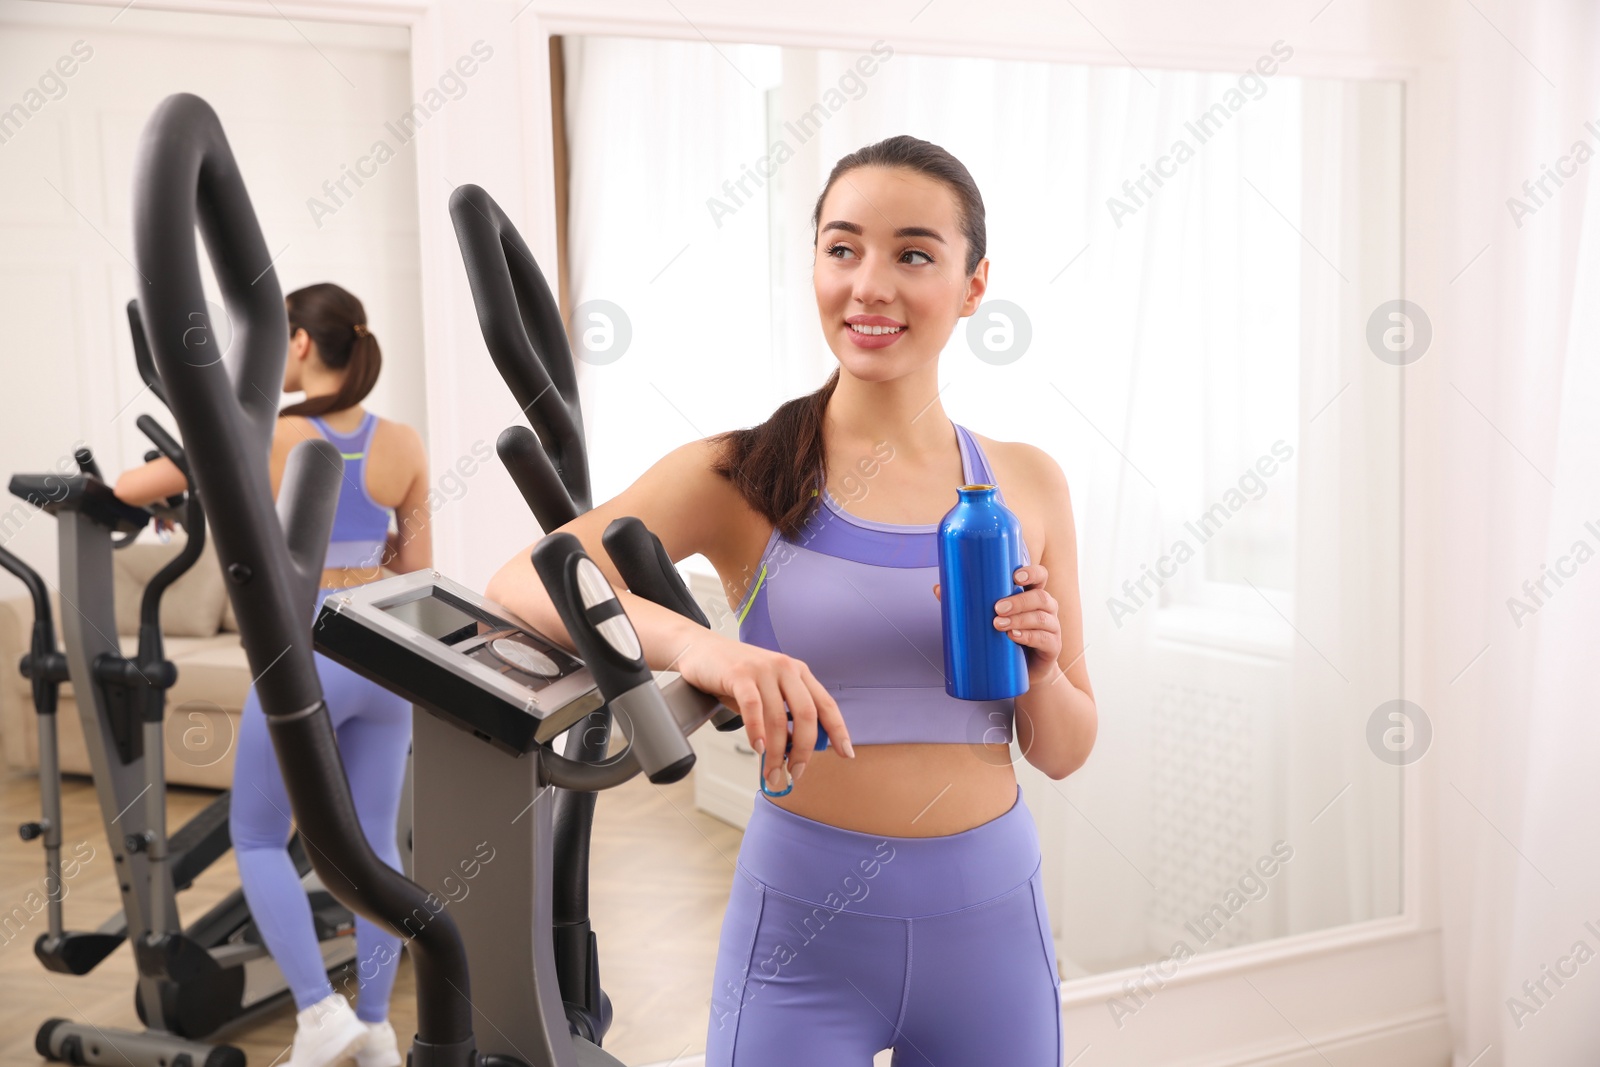 Photo of Woman with bottle near elliptical machine indoors